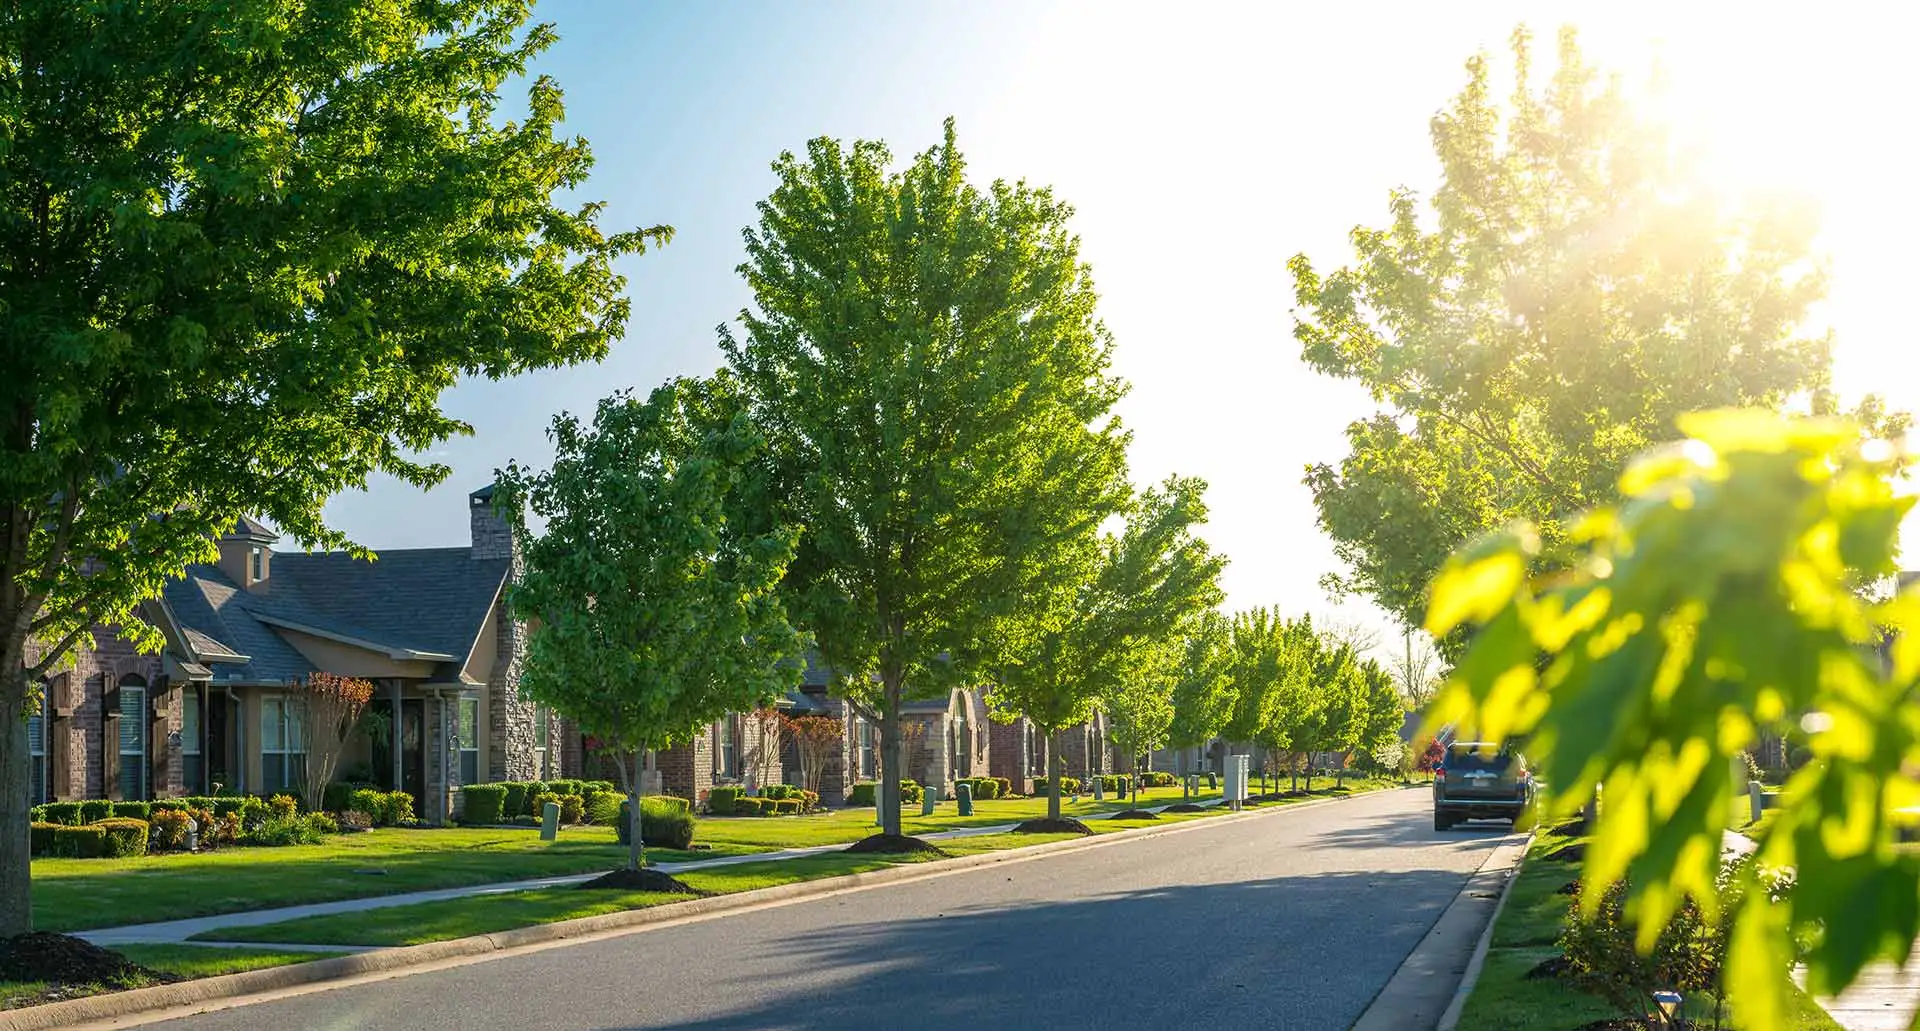 Sun beaming over a street view of a neighborhood in Noblesville, IN.